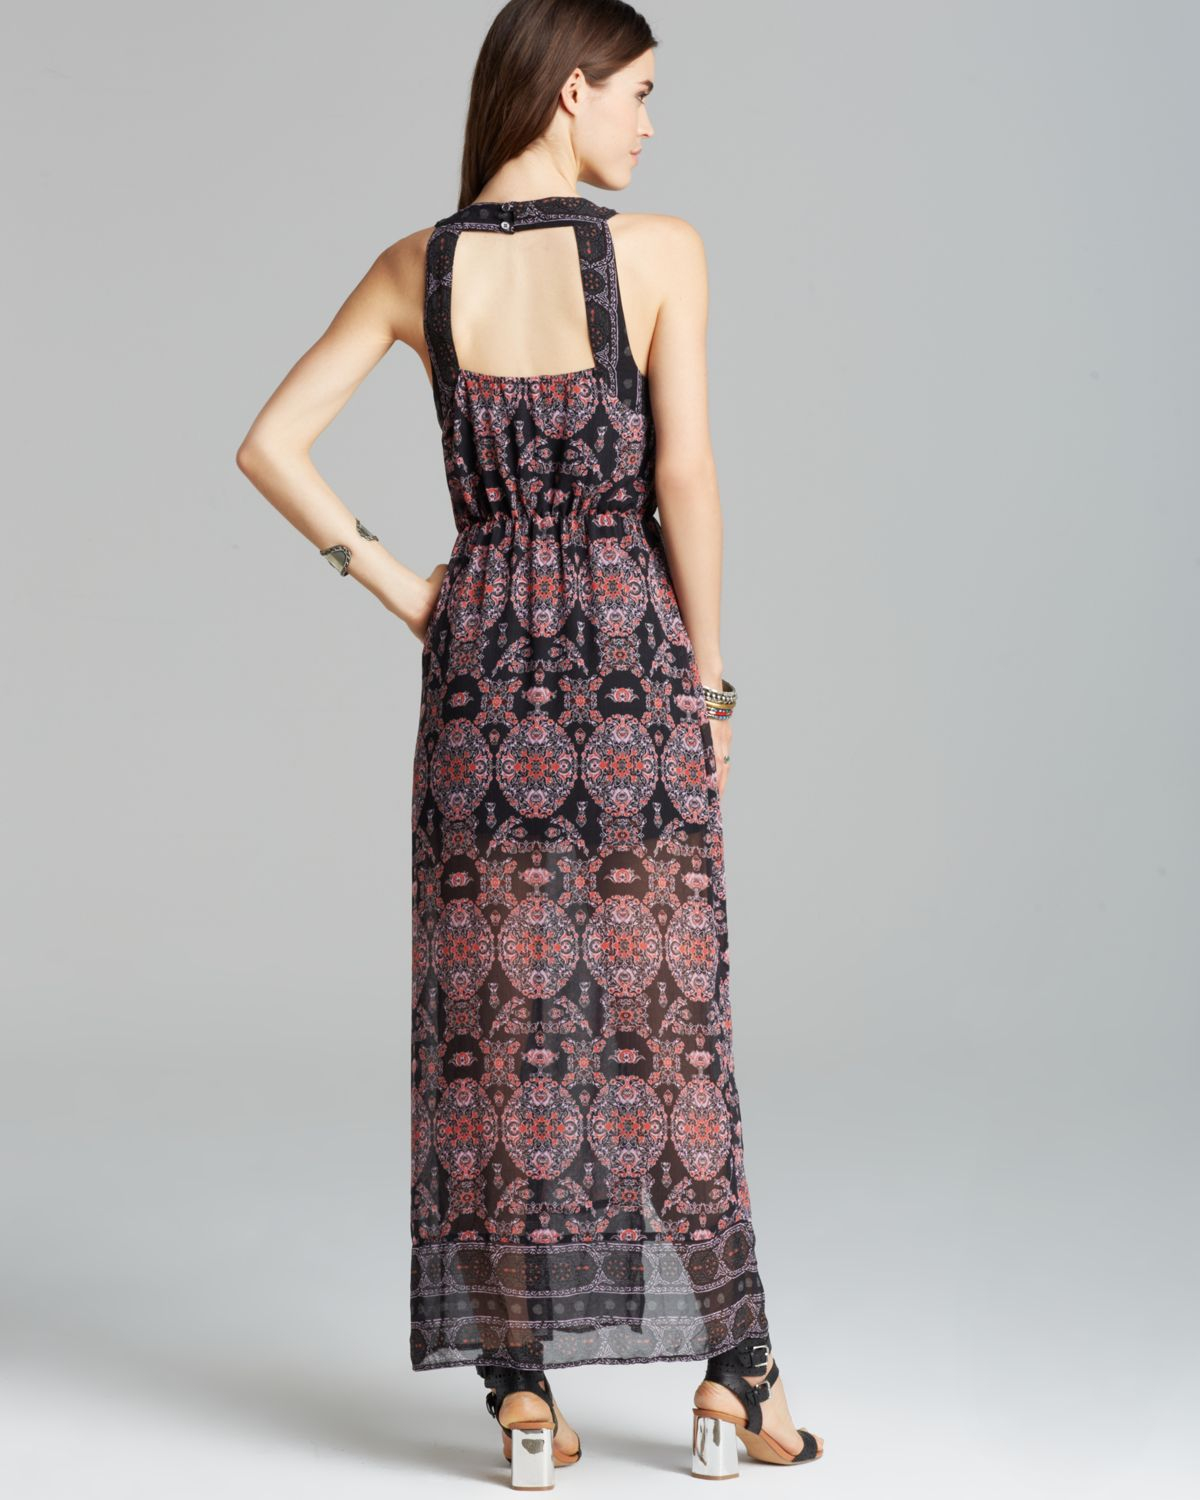 Lyst - Free People Maxi Dress Moroccan Printed in Black